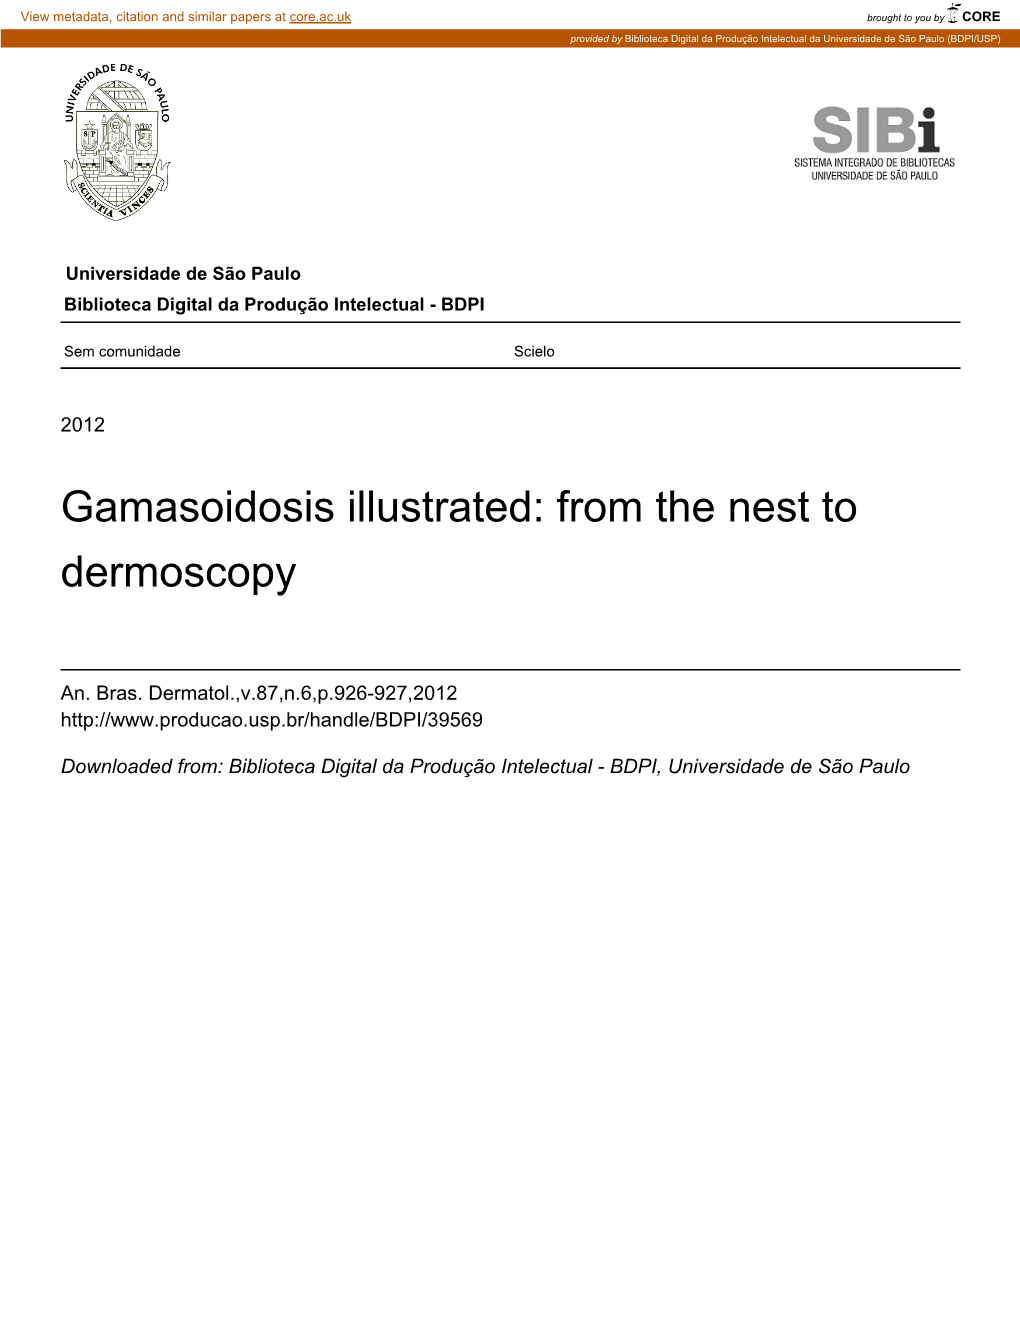 Gamasoidosis Illustrated: from the Nest to Dermoscopy